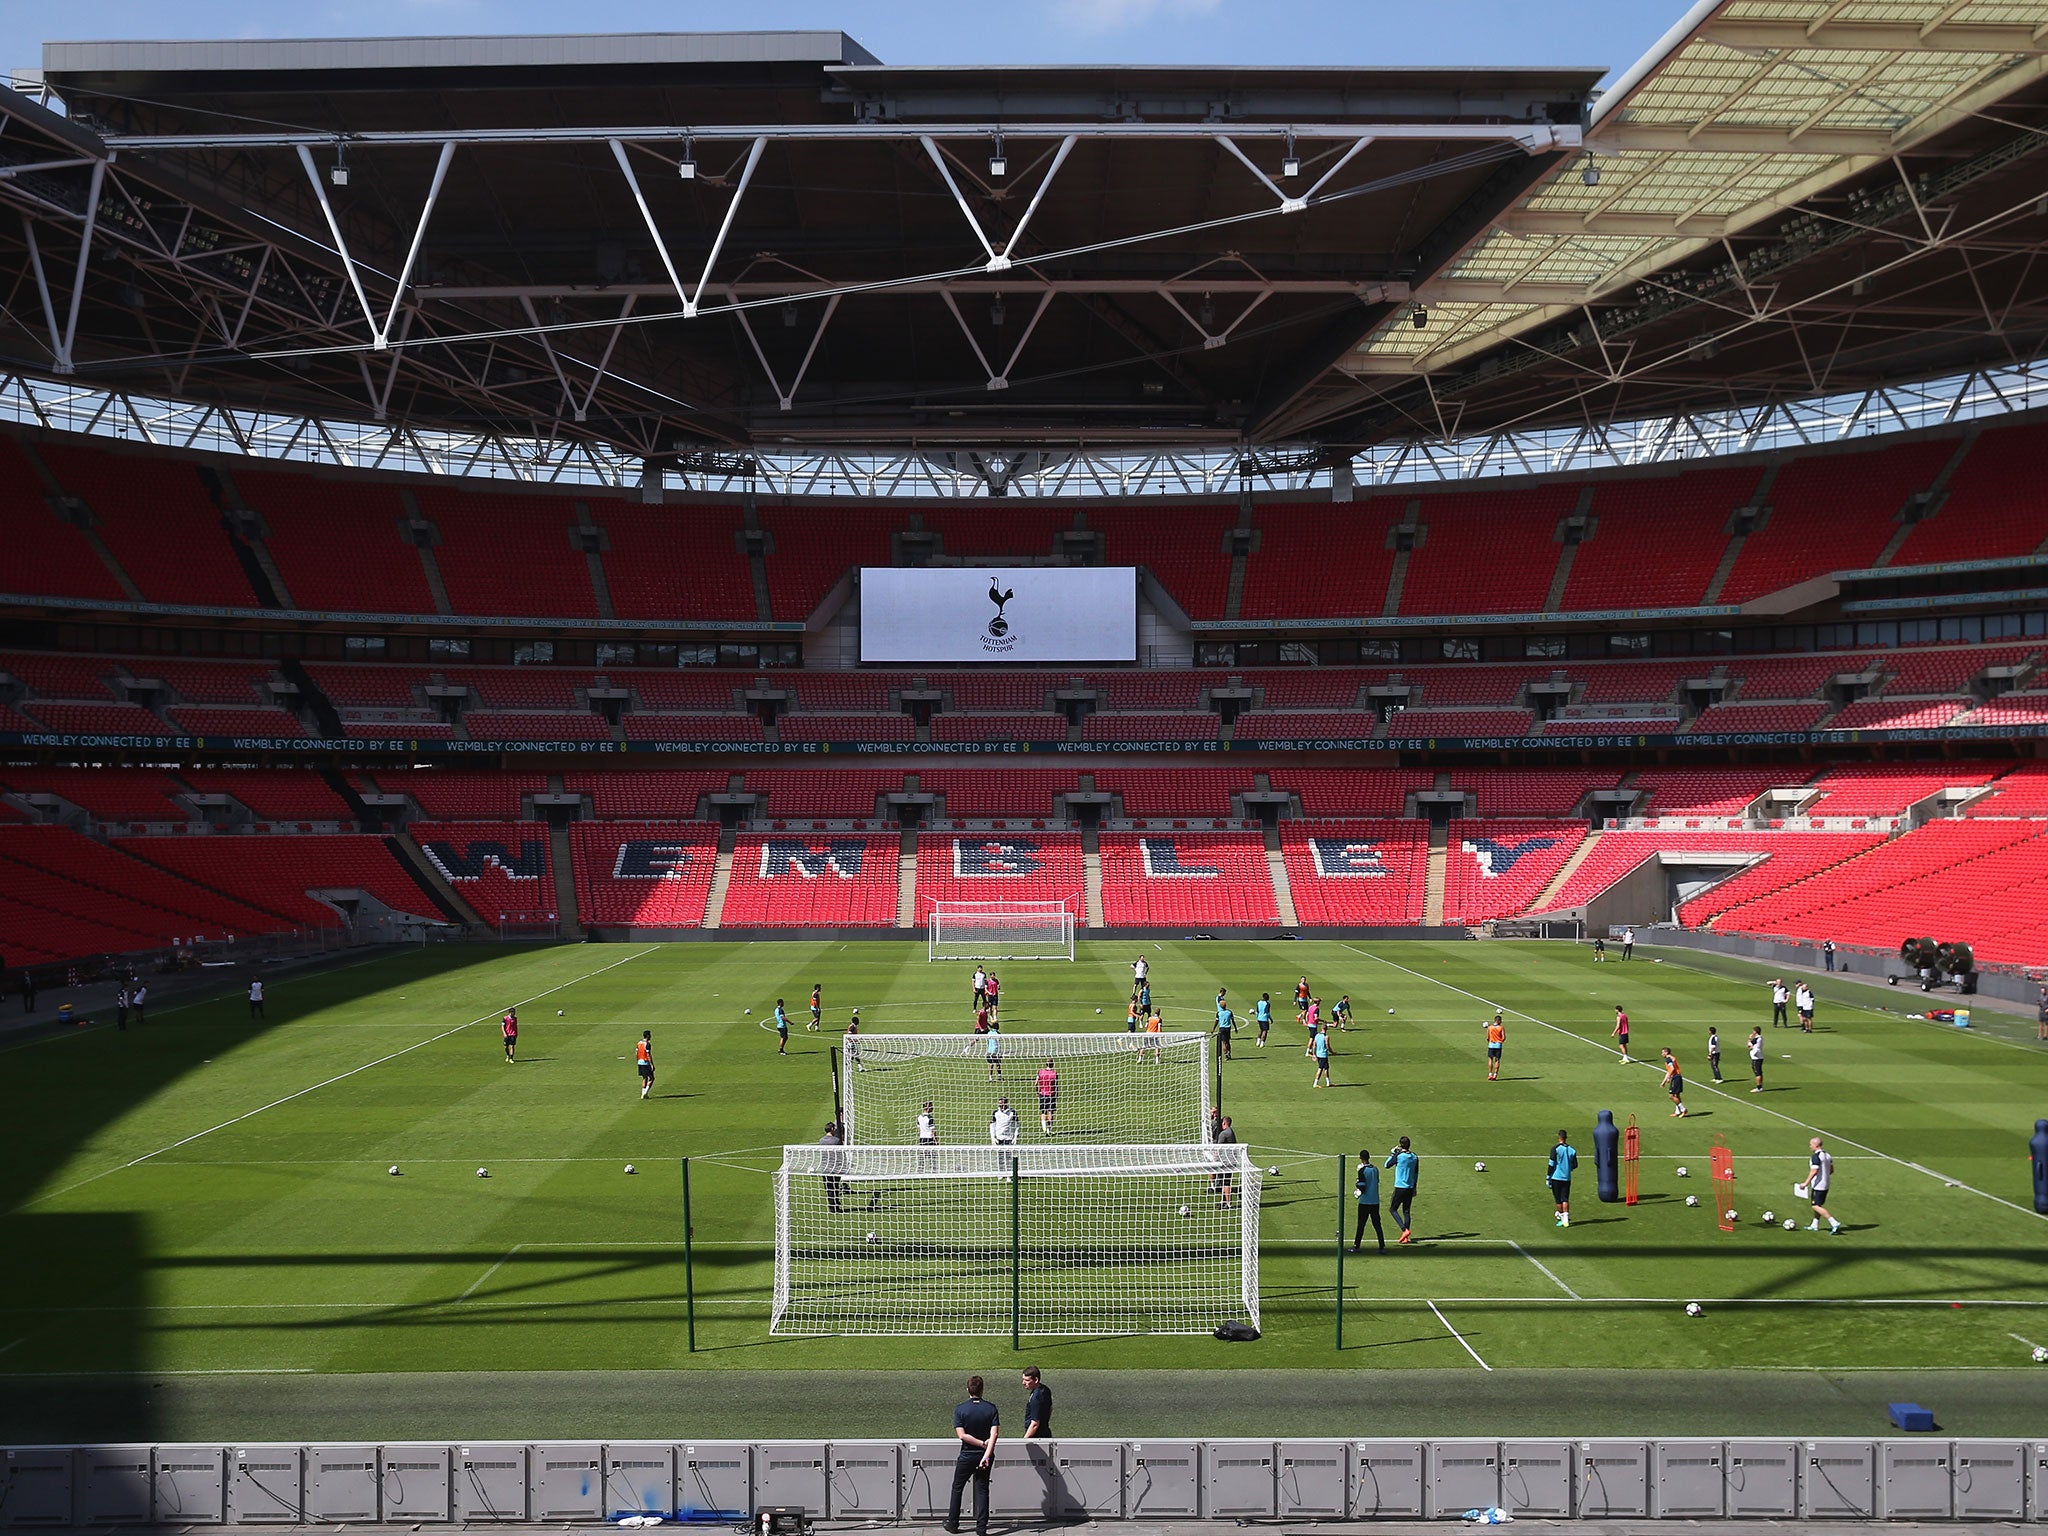 Wembley Stadium is known to lack atmosphere on occasion